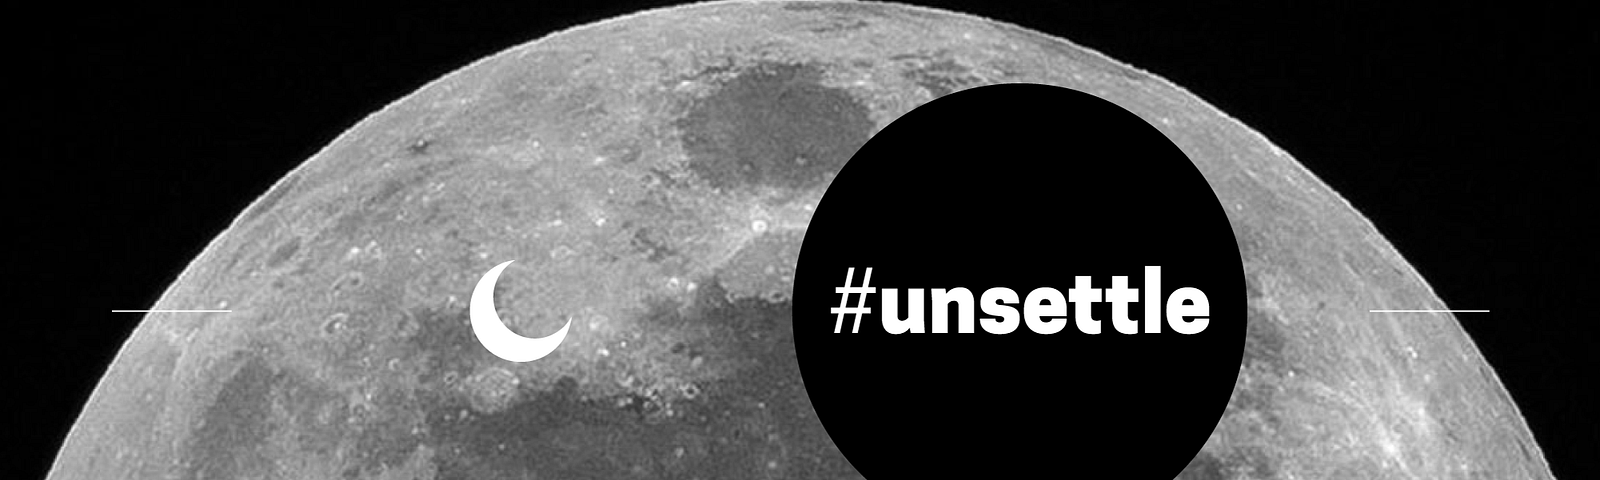 a black circle with the word #unsettle in front of a black and white close-up of the moon.